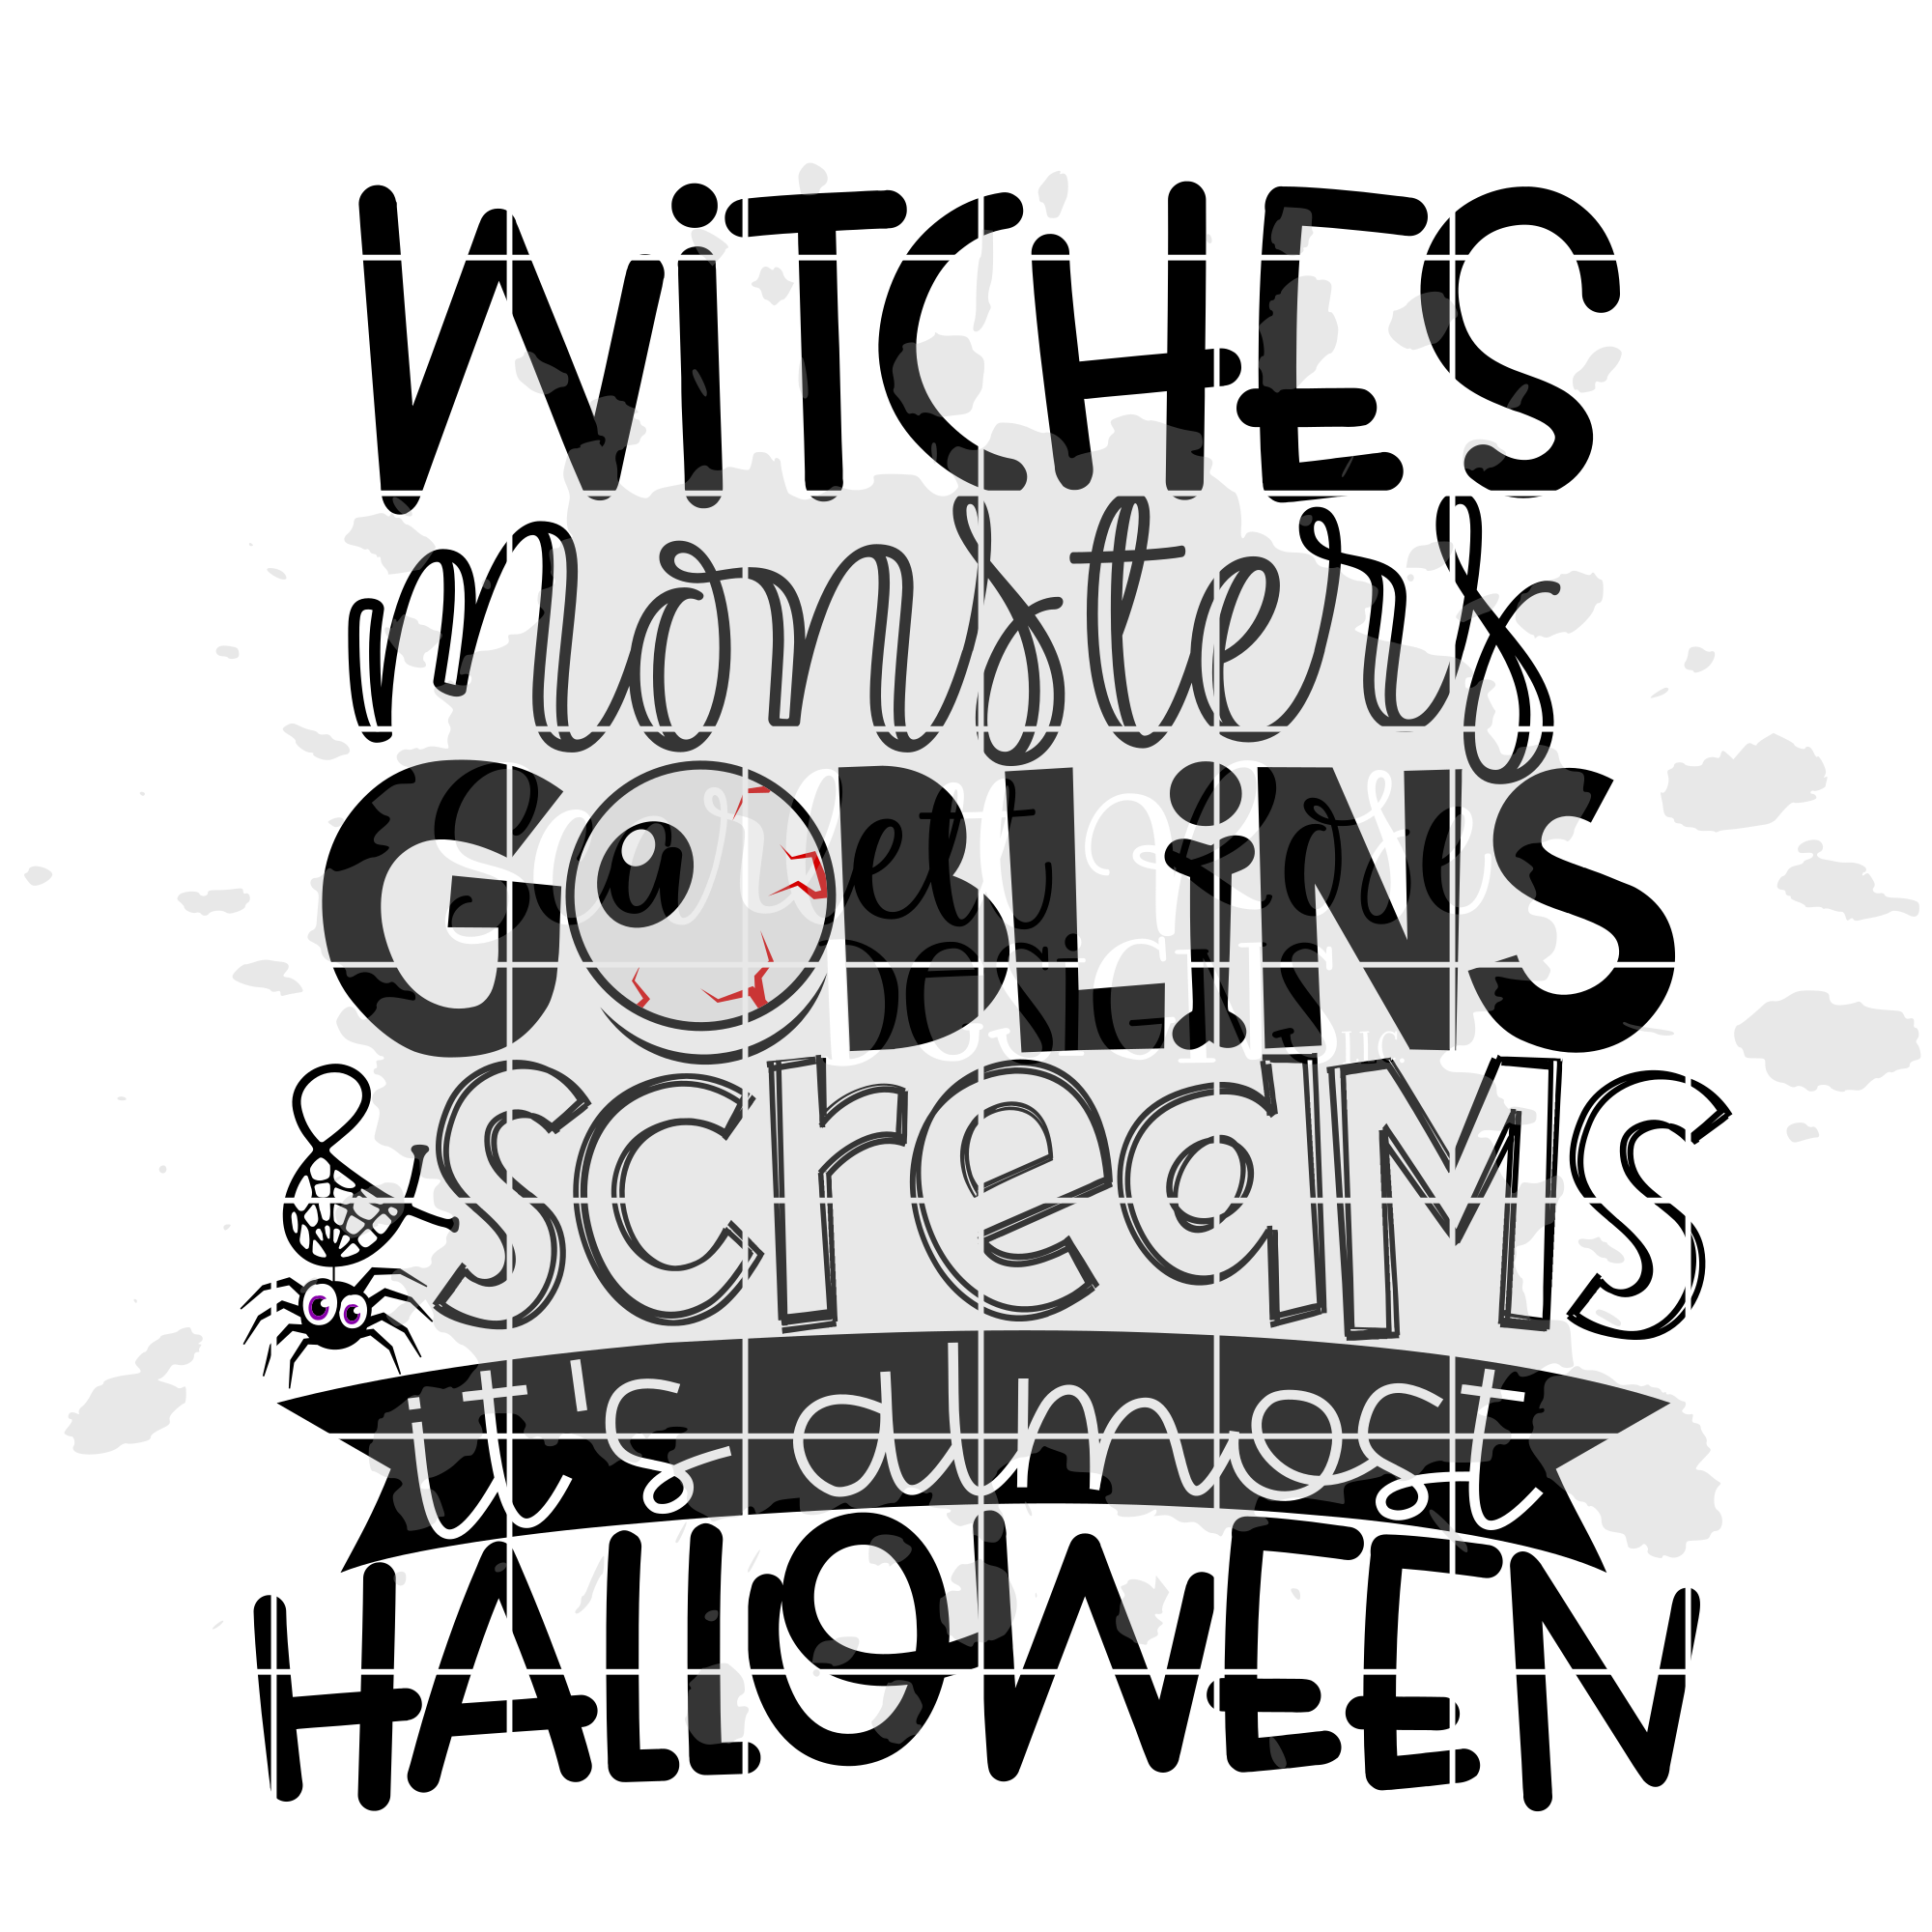 Halloween Svg Witches Monsters Goblins Screams It S Almost Halloween Svg Cut File Scarlett Rose Designs